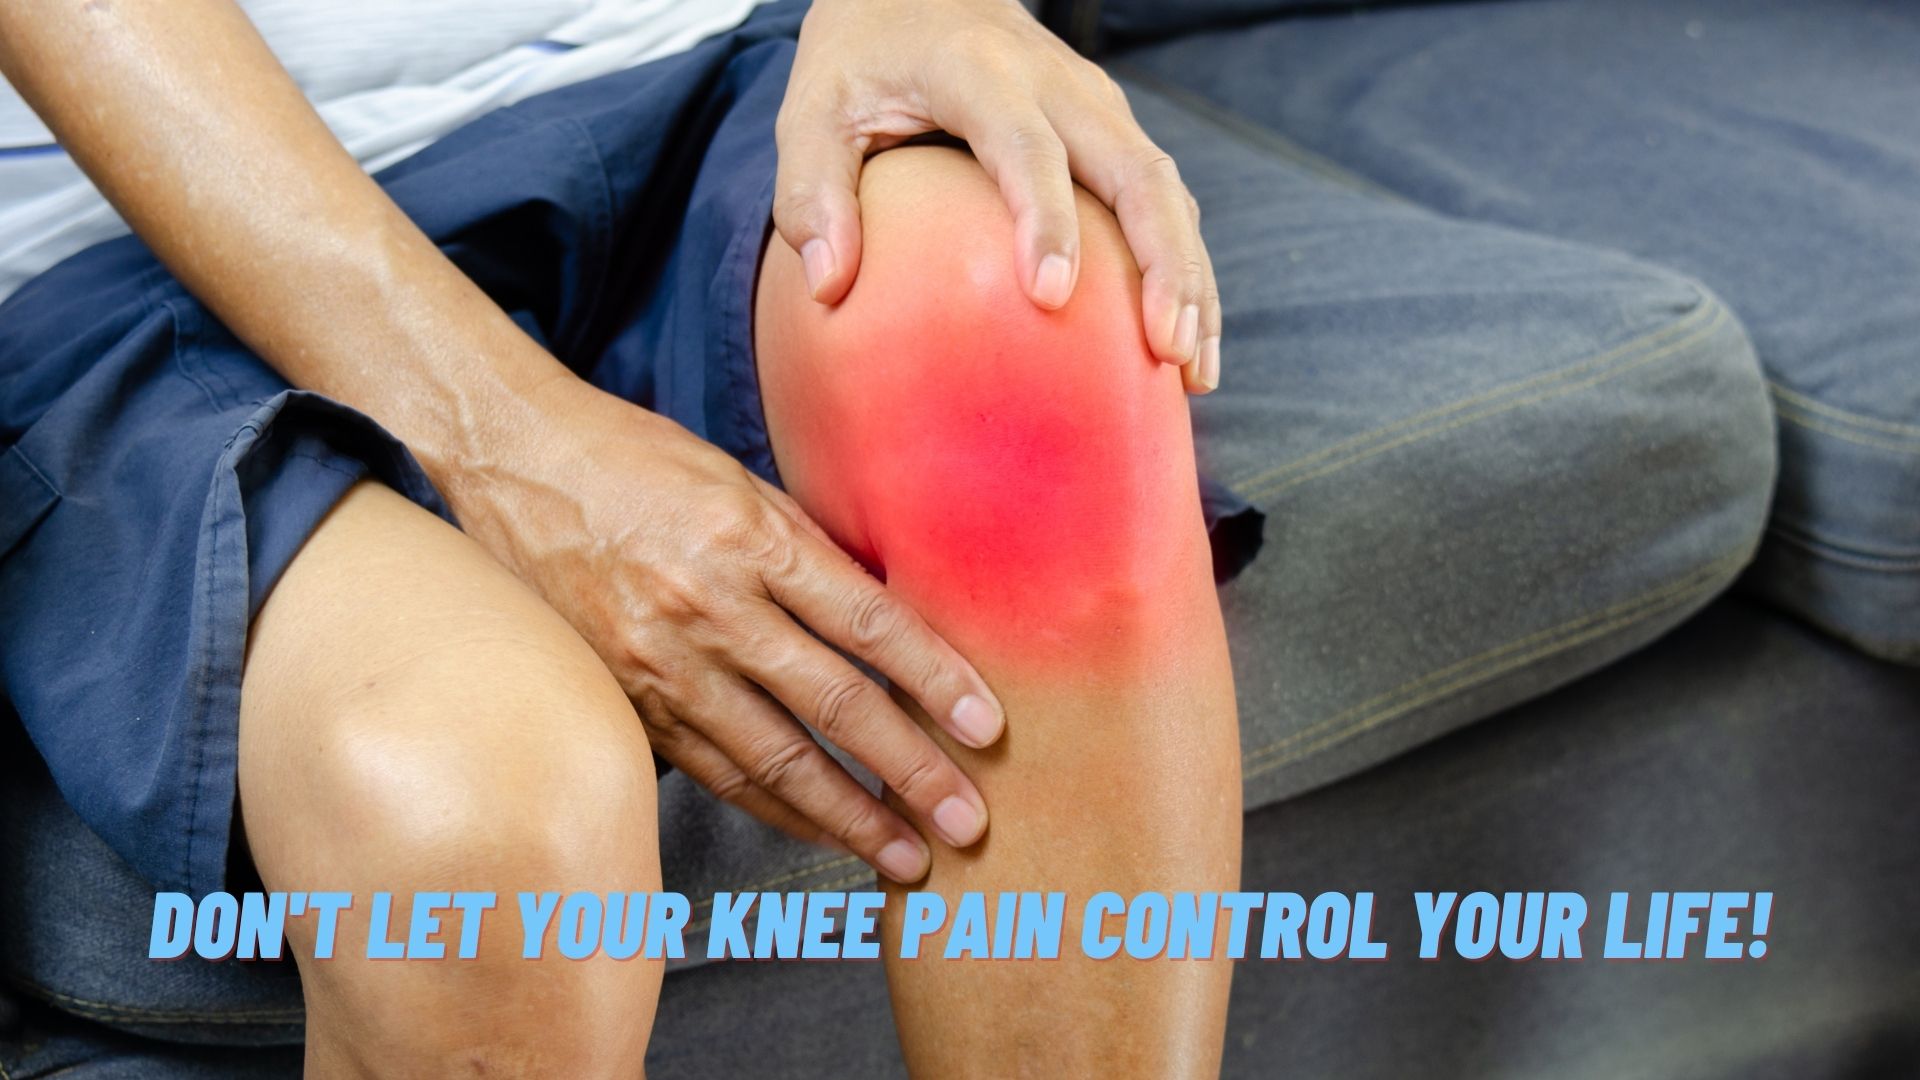 Don't let your knee pain control your life!